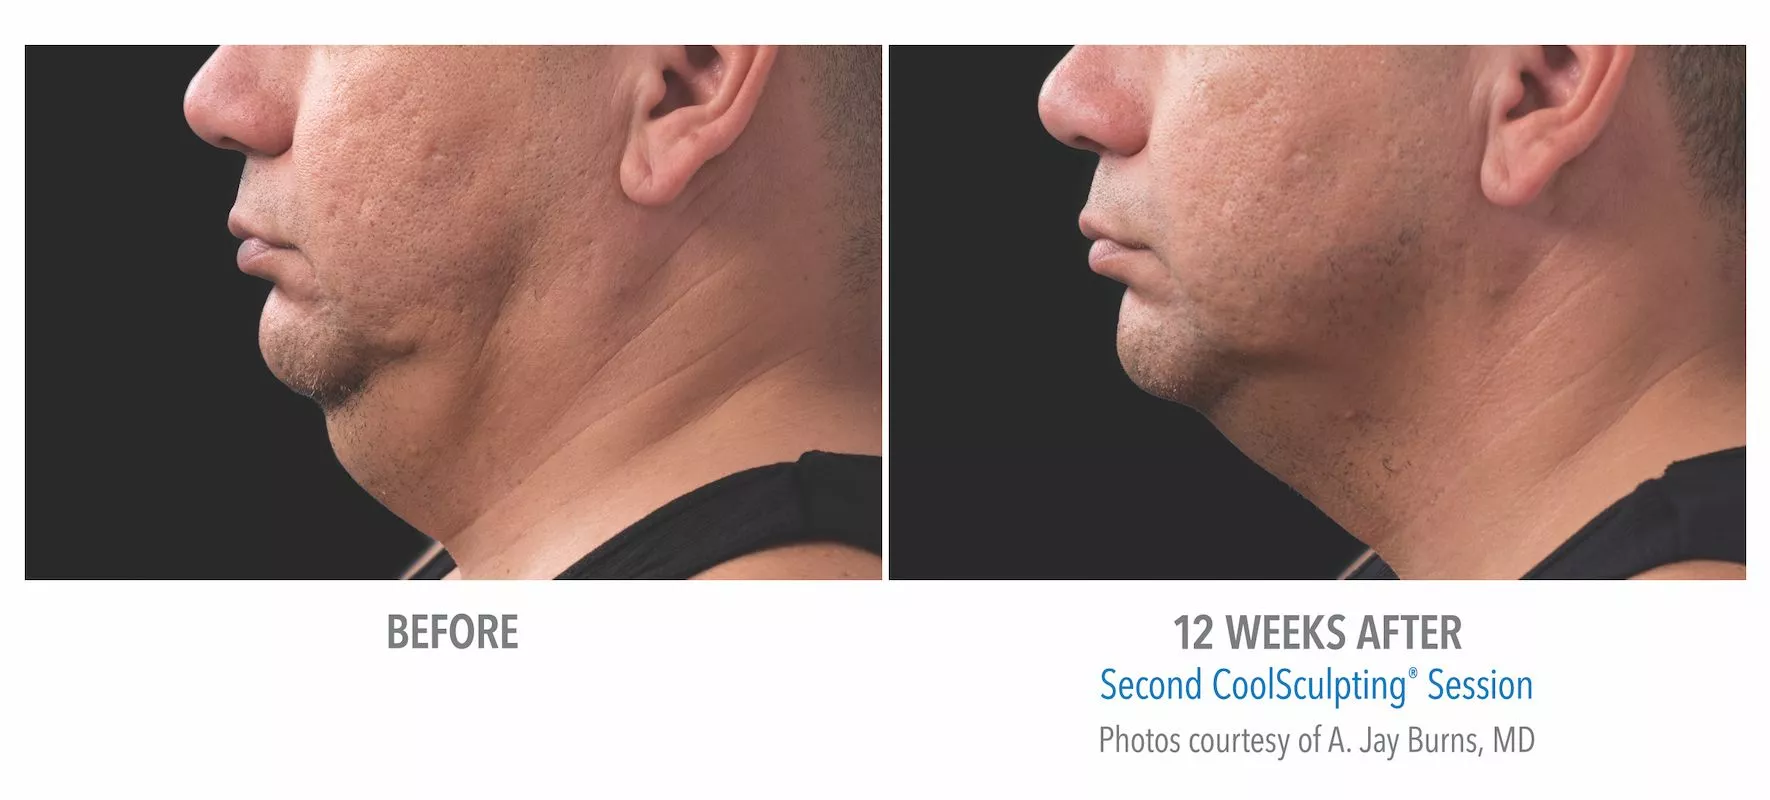 Male CoolSculpting patient in Las Vegas. Before and after photo of chin / jawline 12 weeks post CoolSculpting treatment. Patient did not use Kybella.